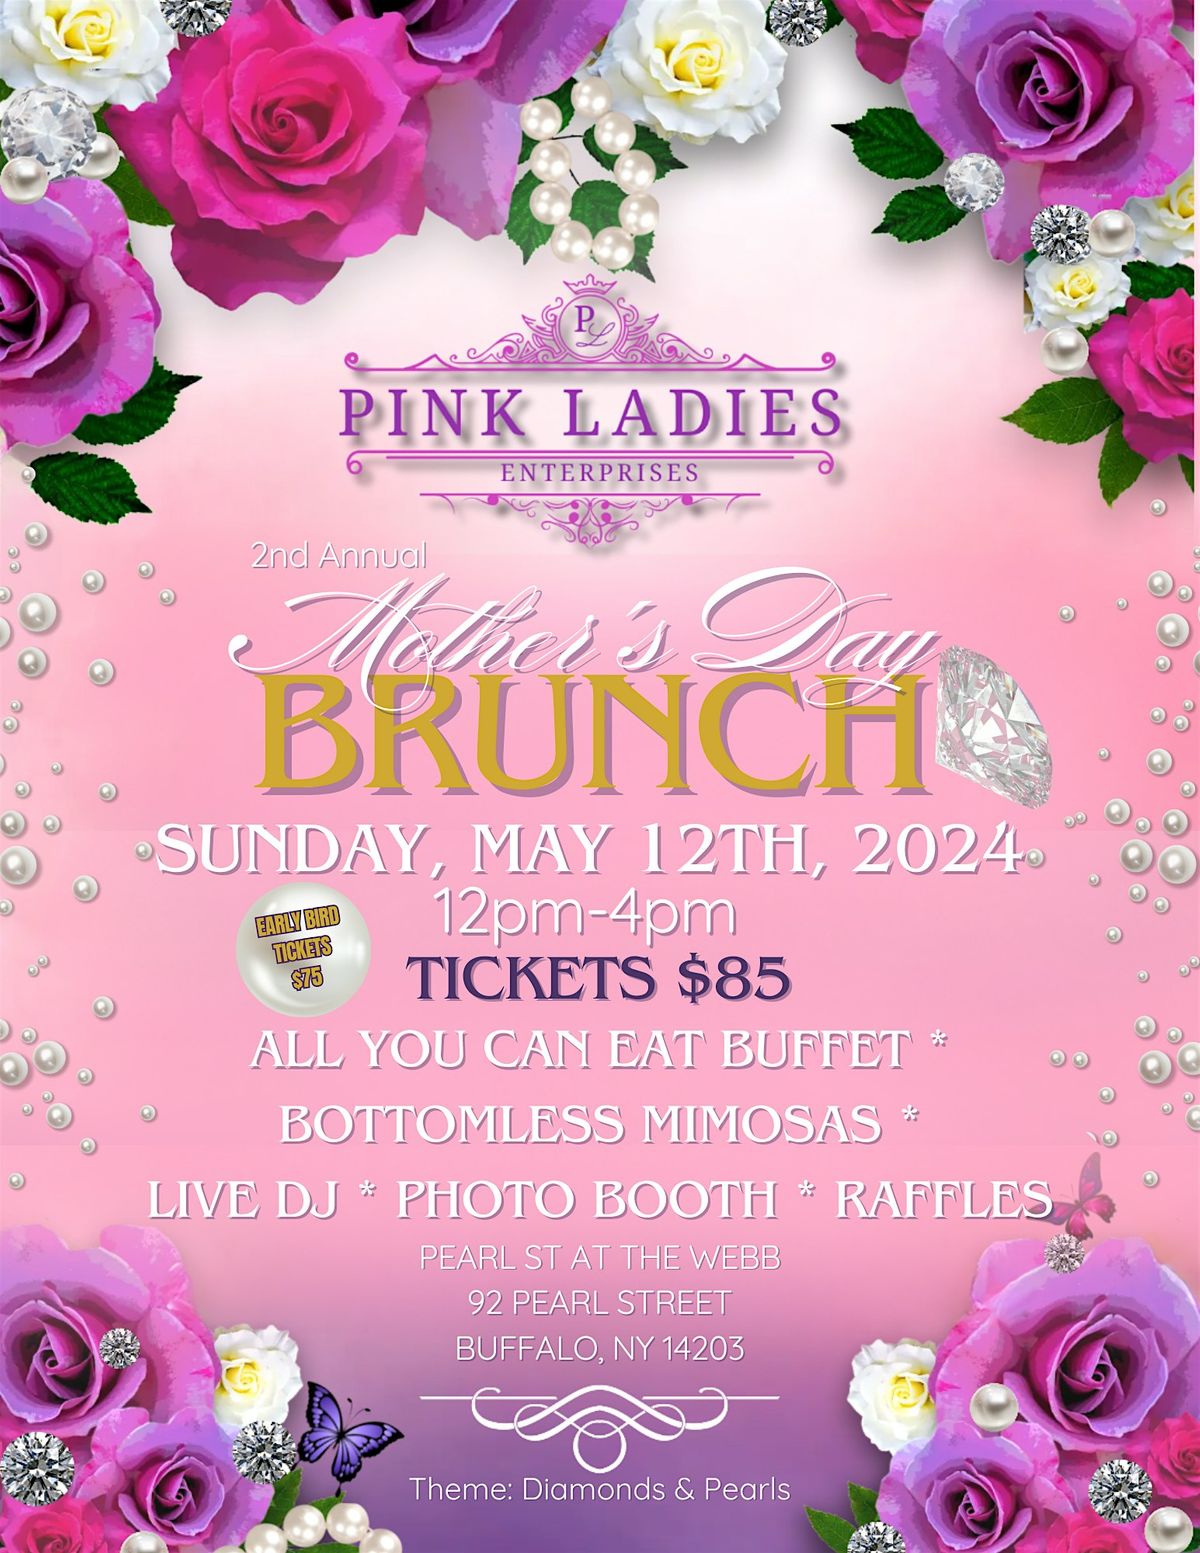 Pink Ladies' 2nd Annual Mother's Day Brunch